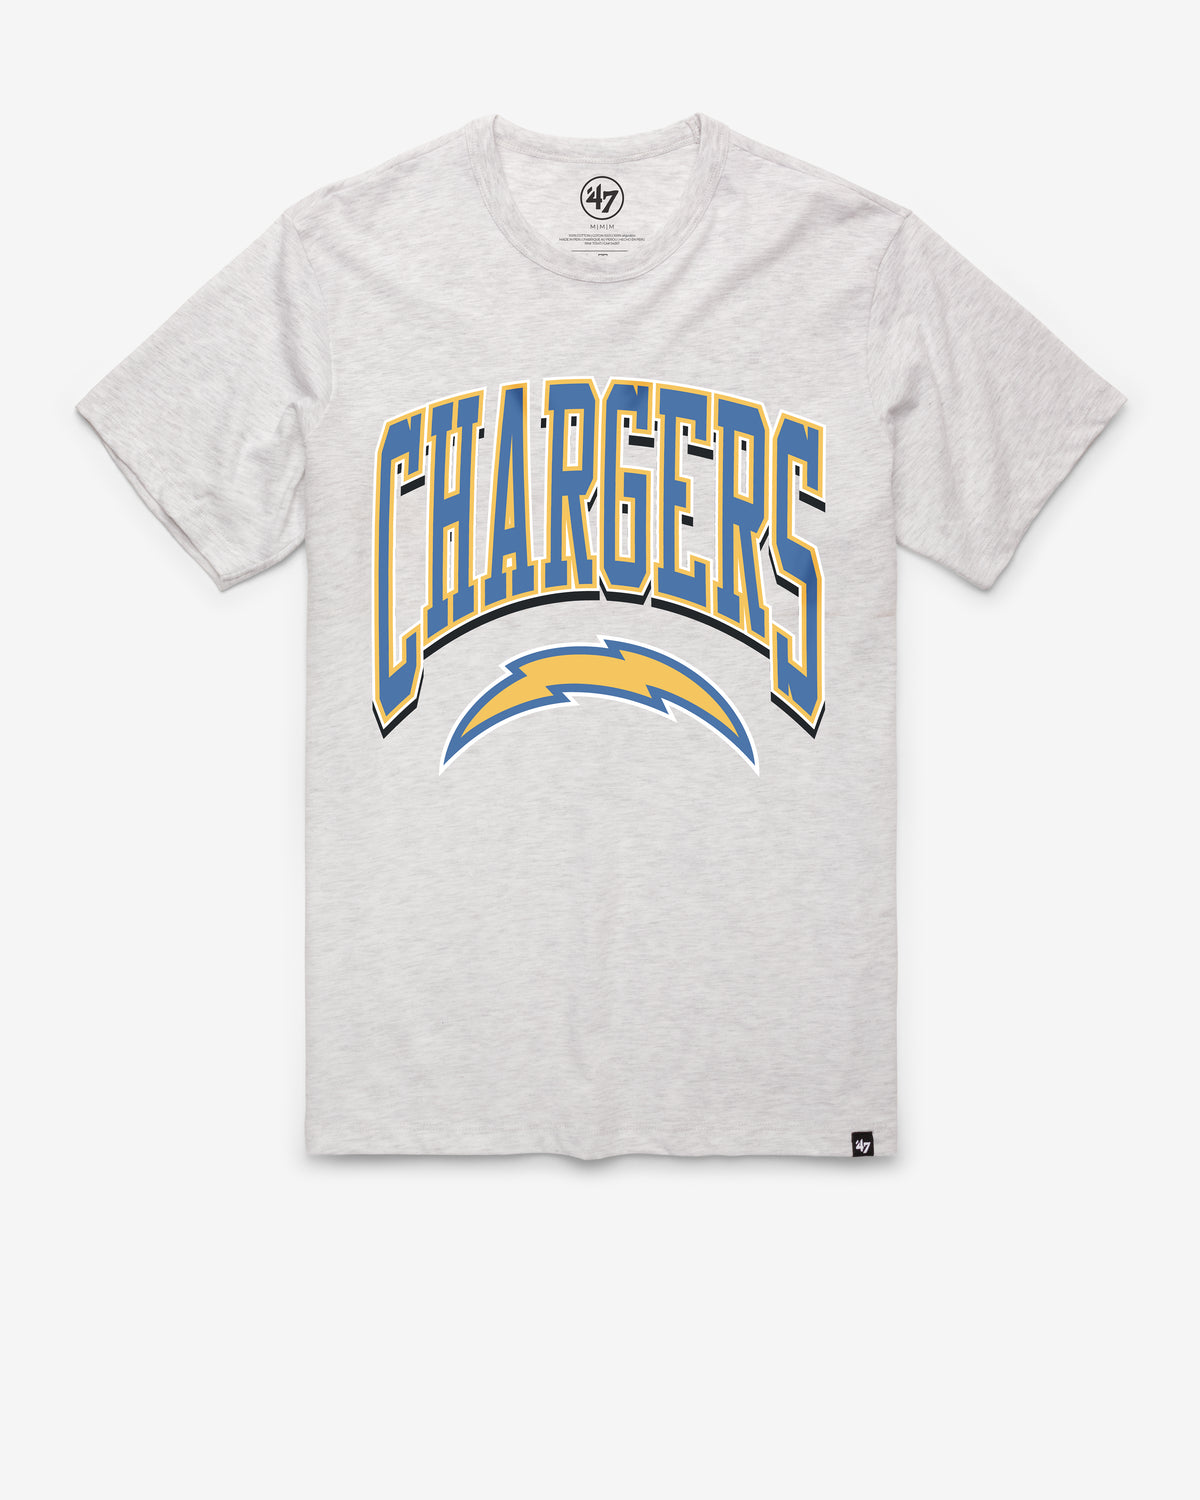 LOS ANGELES CHARGERS WALK TALL '47 FRANKLIN TEE